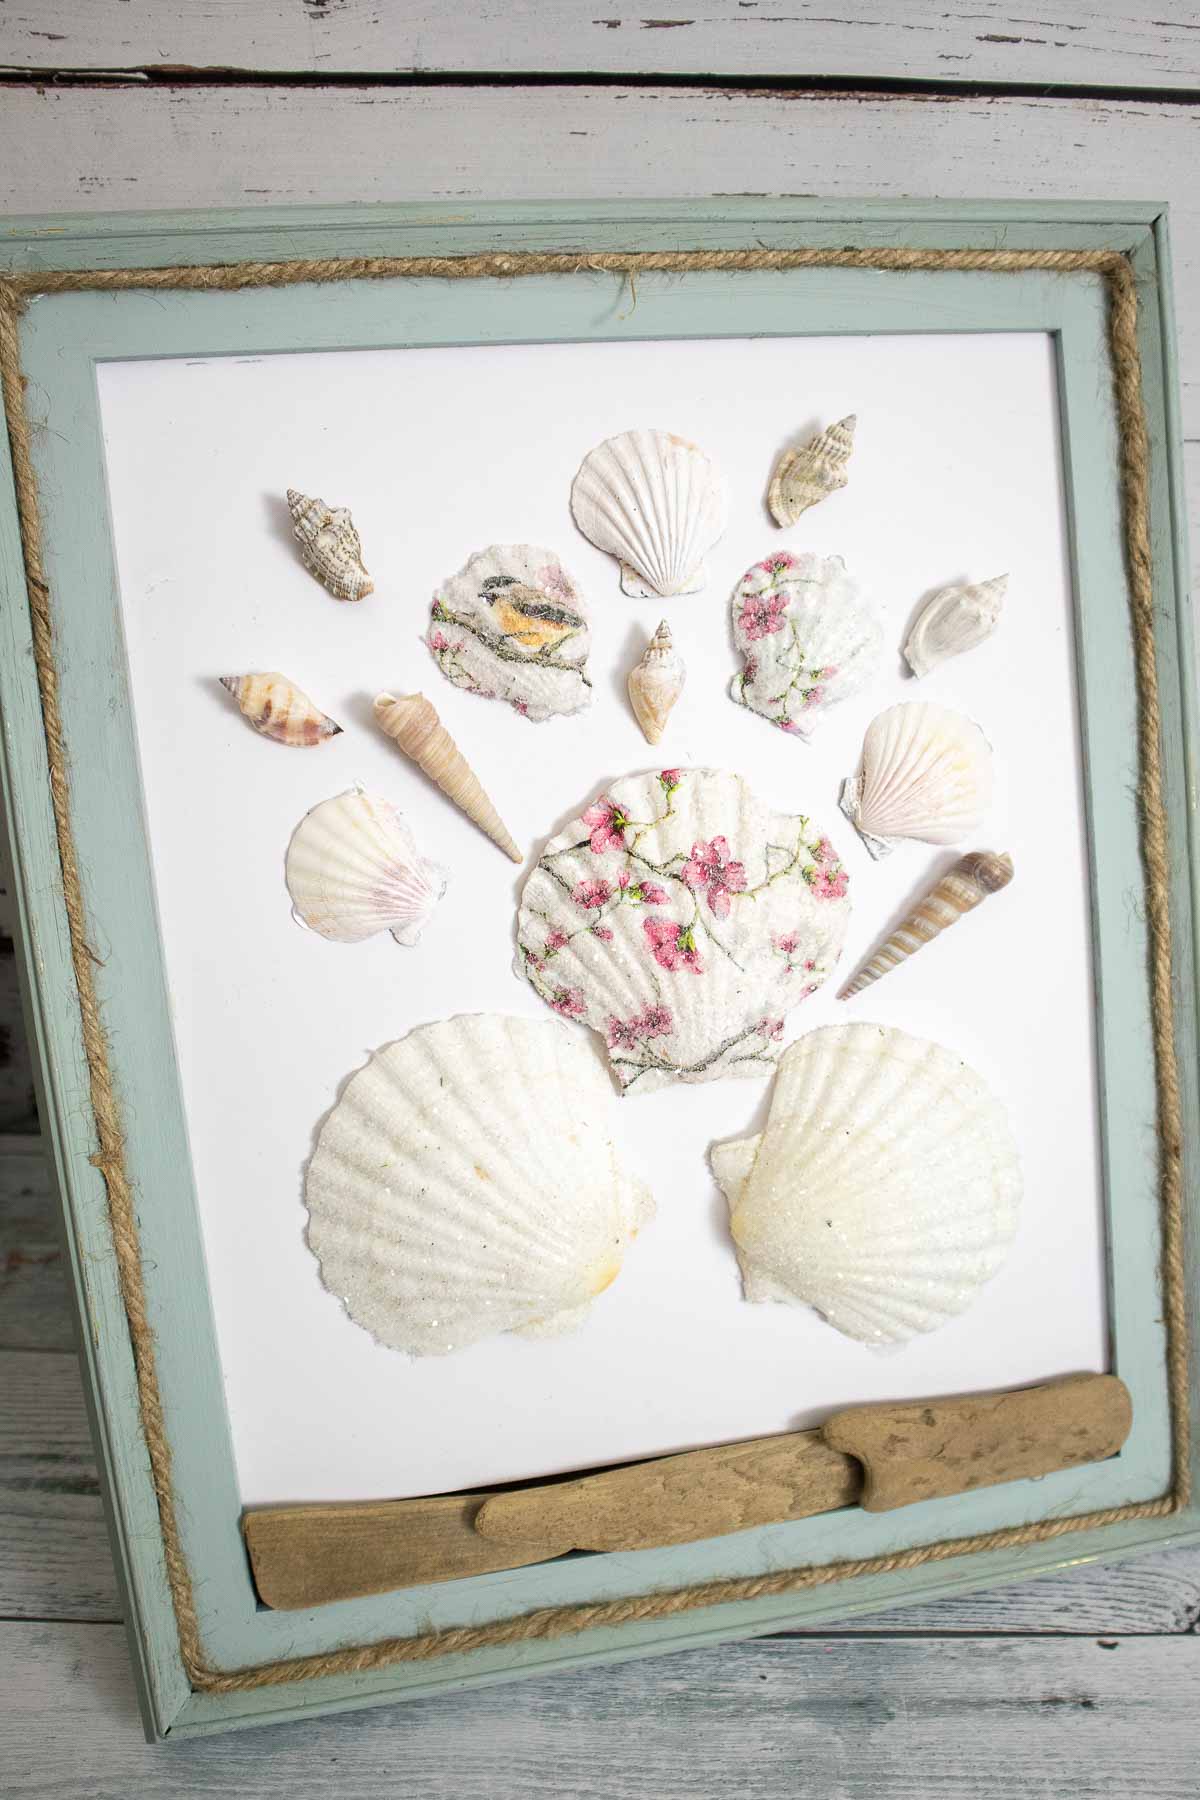 Decoupage seashells using paper napkins and decorated with driftwood, twine on a painted frame.